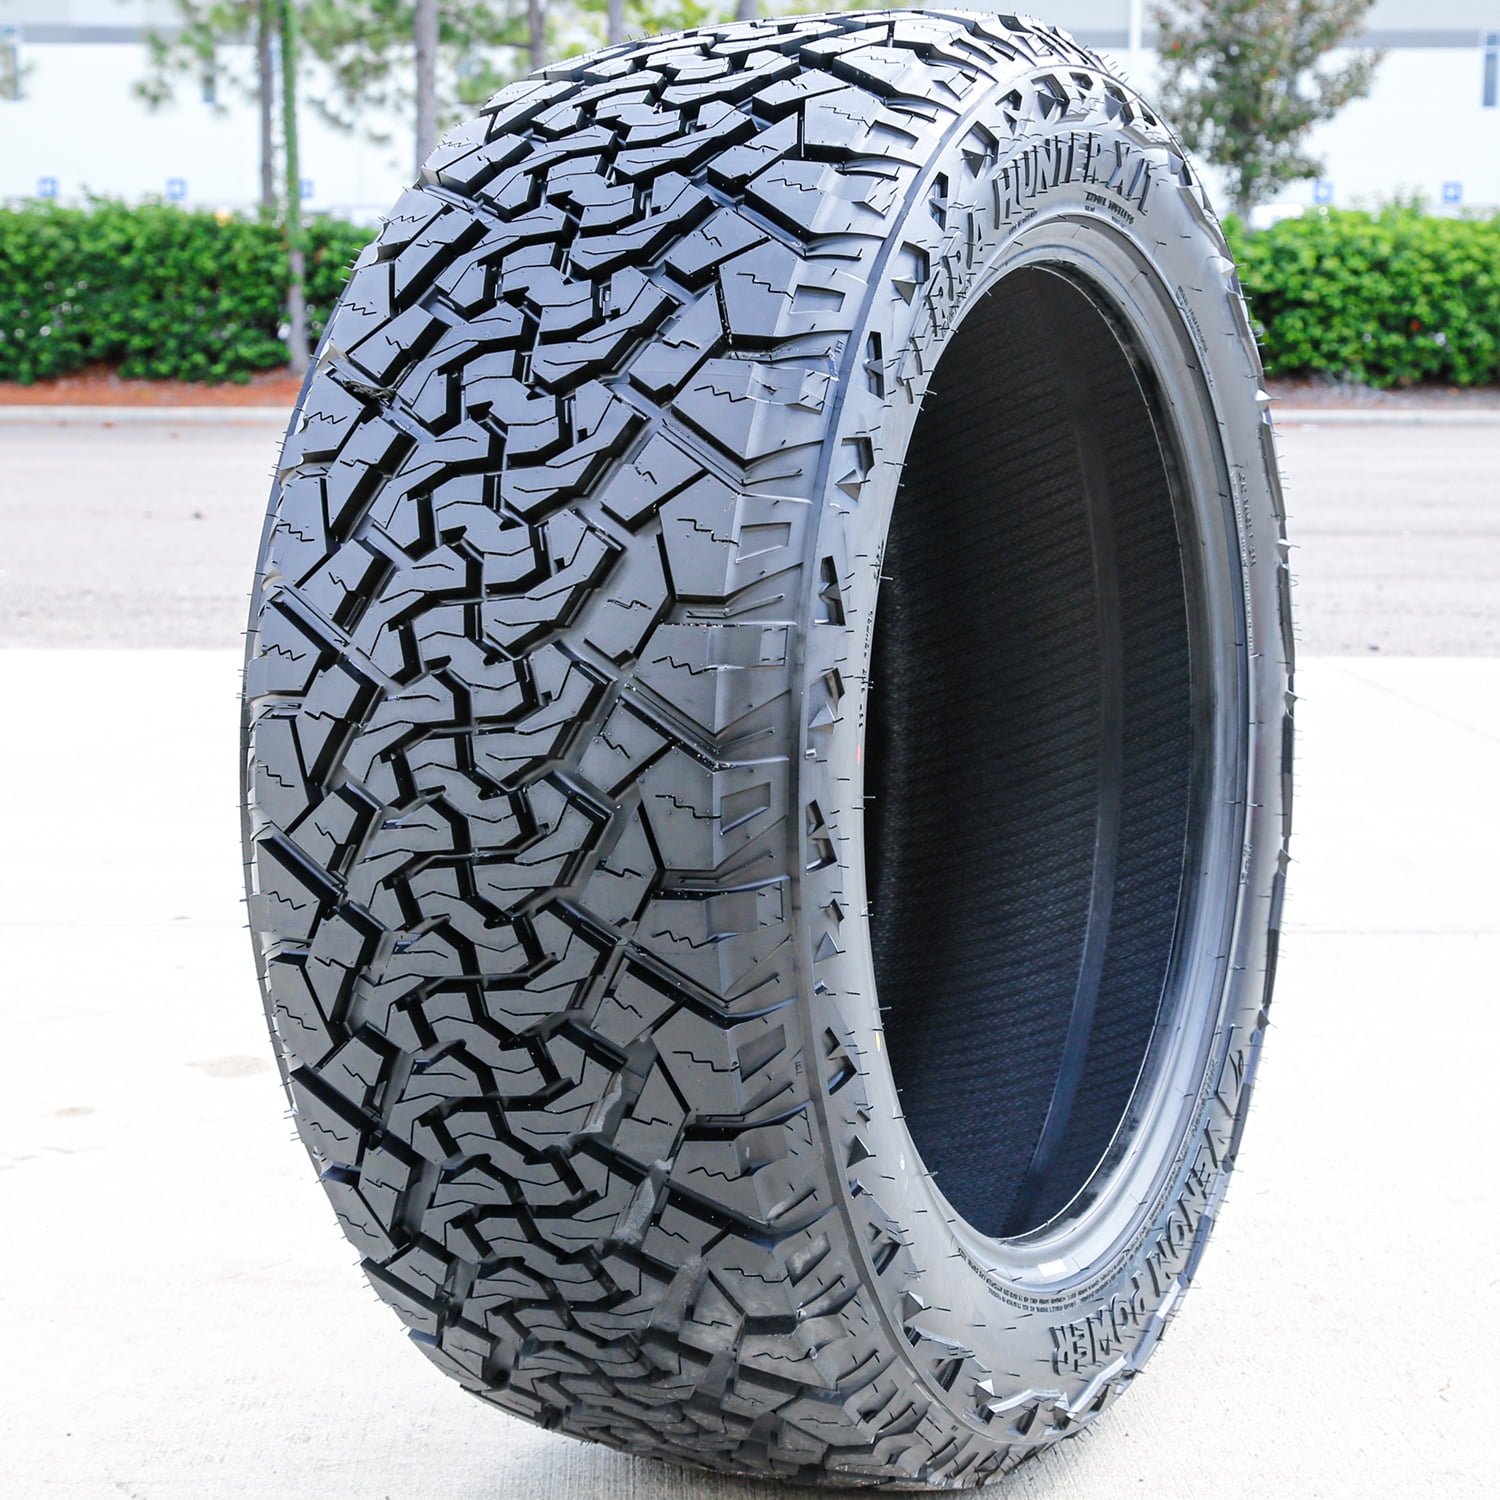 Continental WinterContact TS850 P 215/65R17 99H BSW (2 Tires)